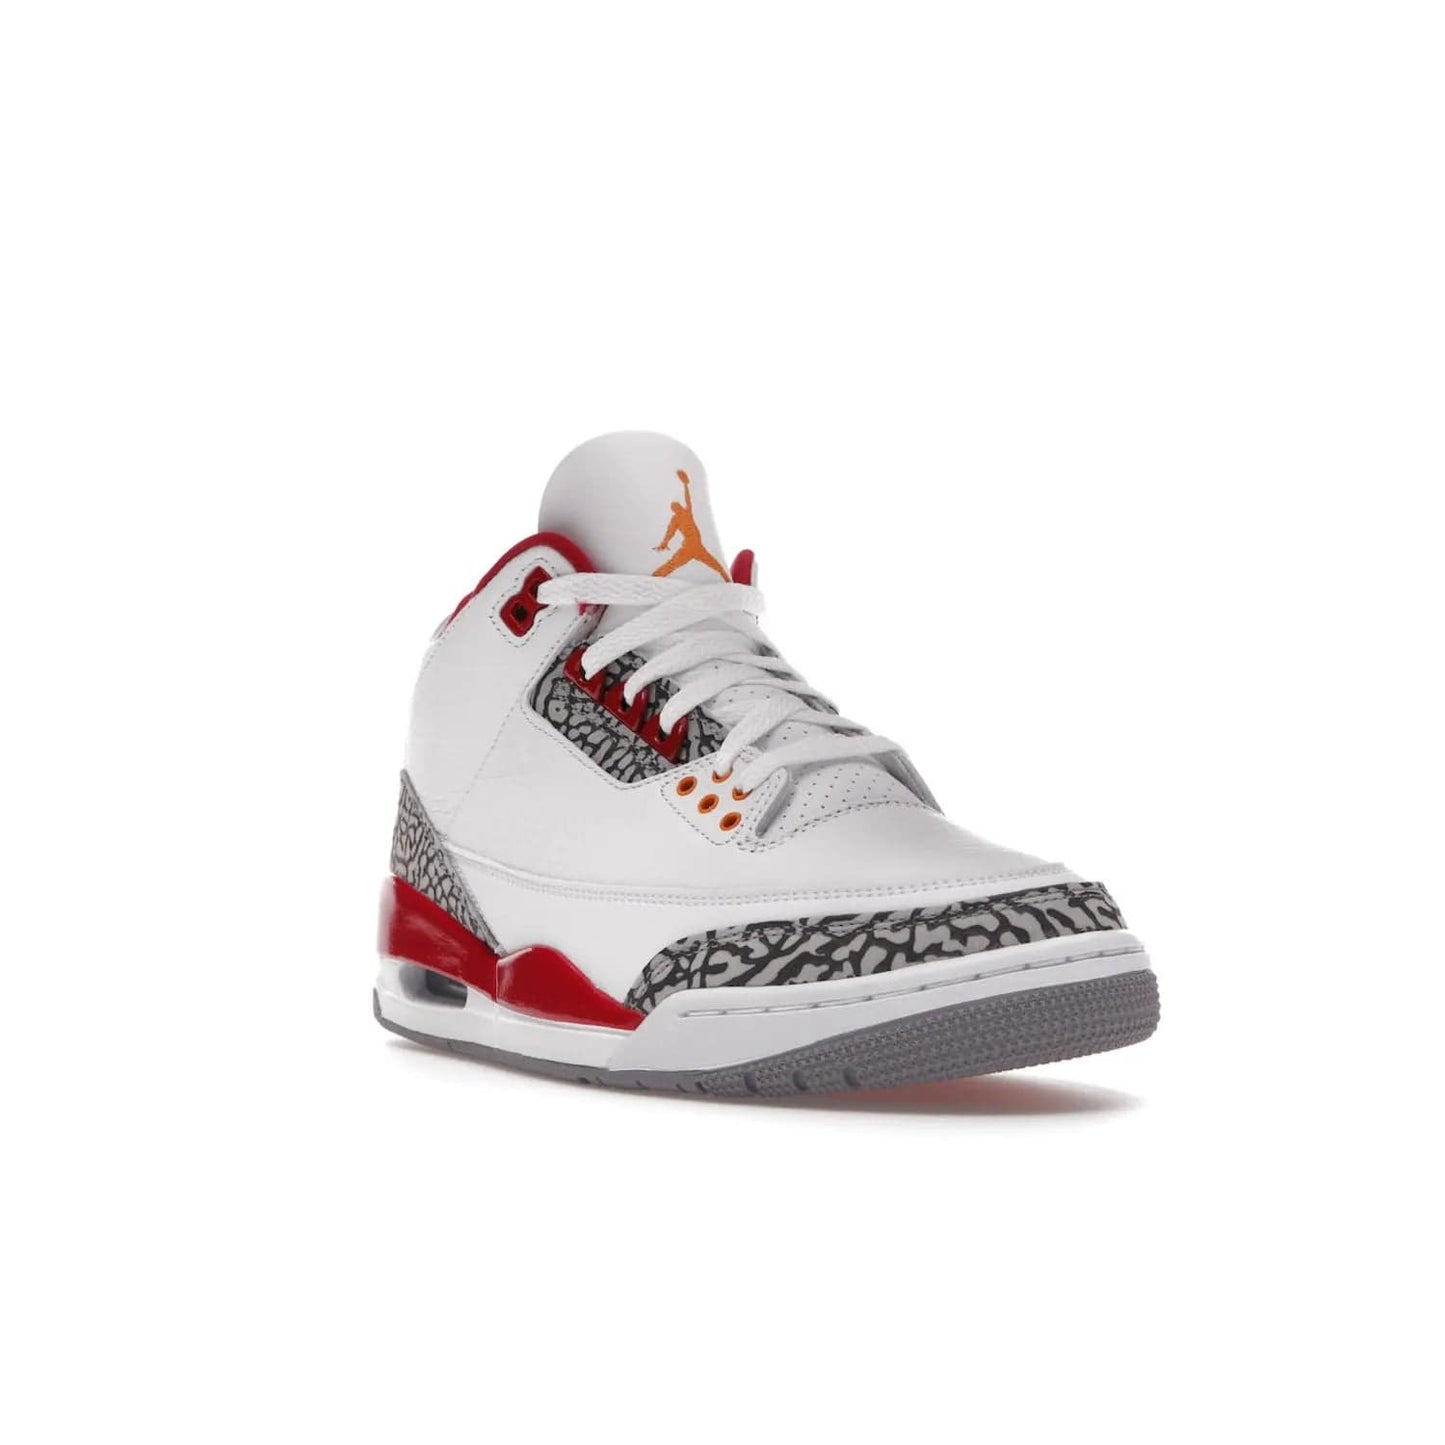 Jordan 3 Retro Cardinal Red - Image 7 - Only at www.BallersClubKickz.com - Air Jordan 3 Retro Cardinal Red combines classic style and modern appeal - white tumbled leather, signature Elephant Print overlays, cardinal red midsoles, Jumpman logo embroidery. Available Feb 2022.